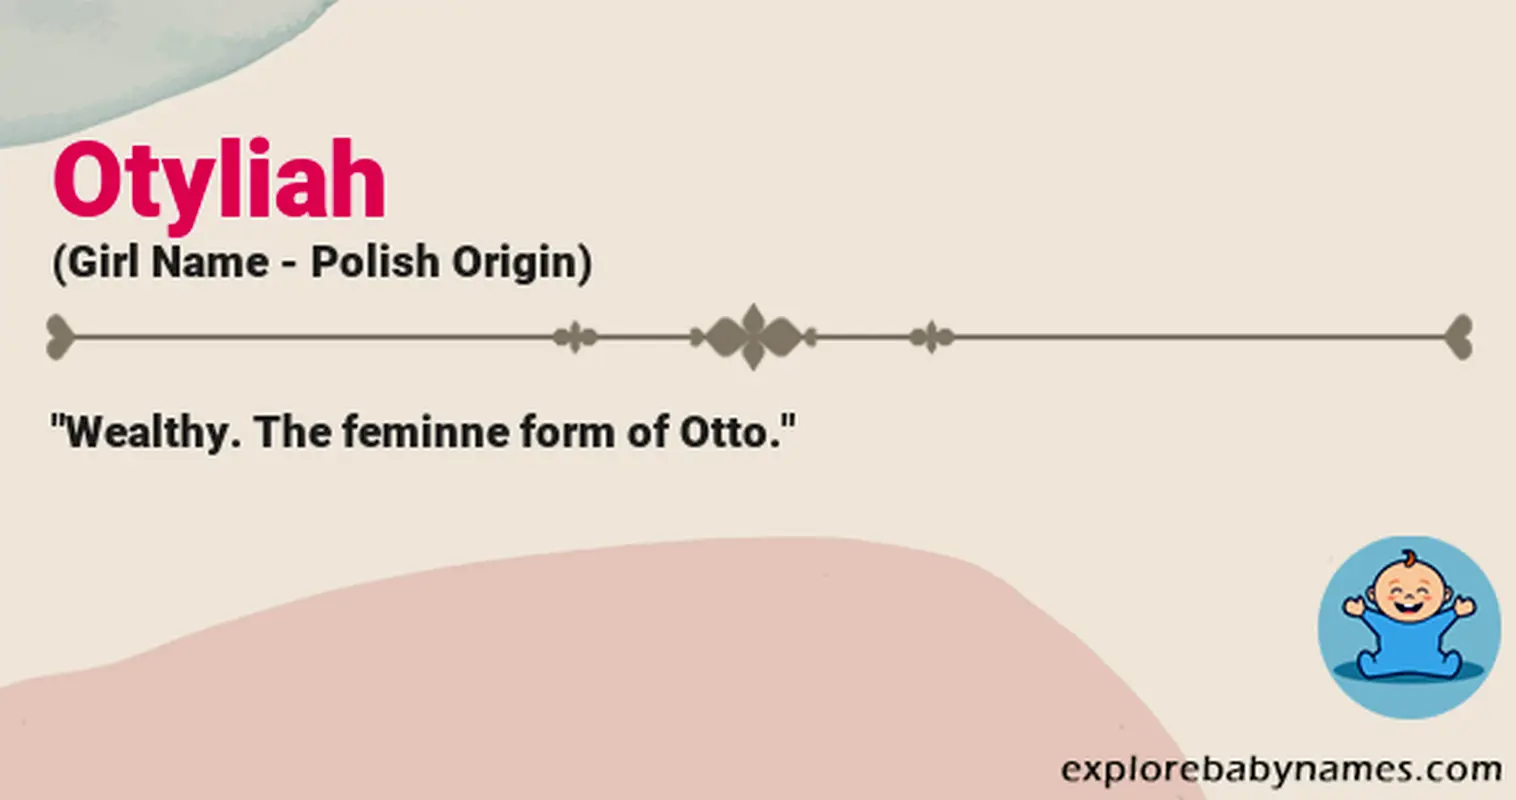 Meaning of Otyliah